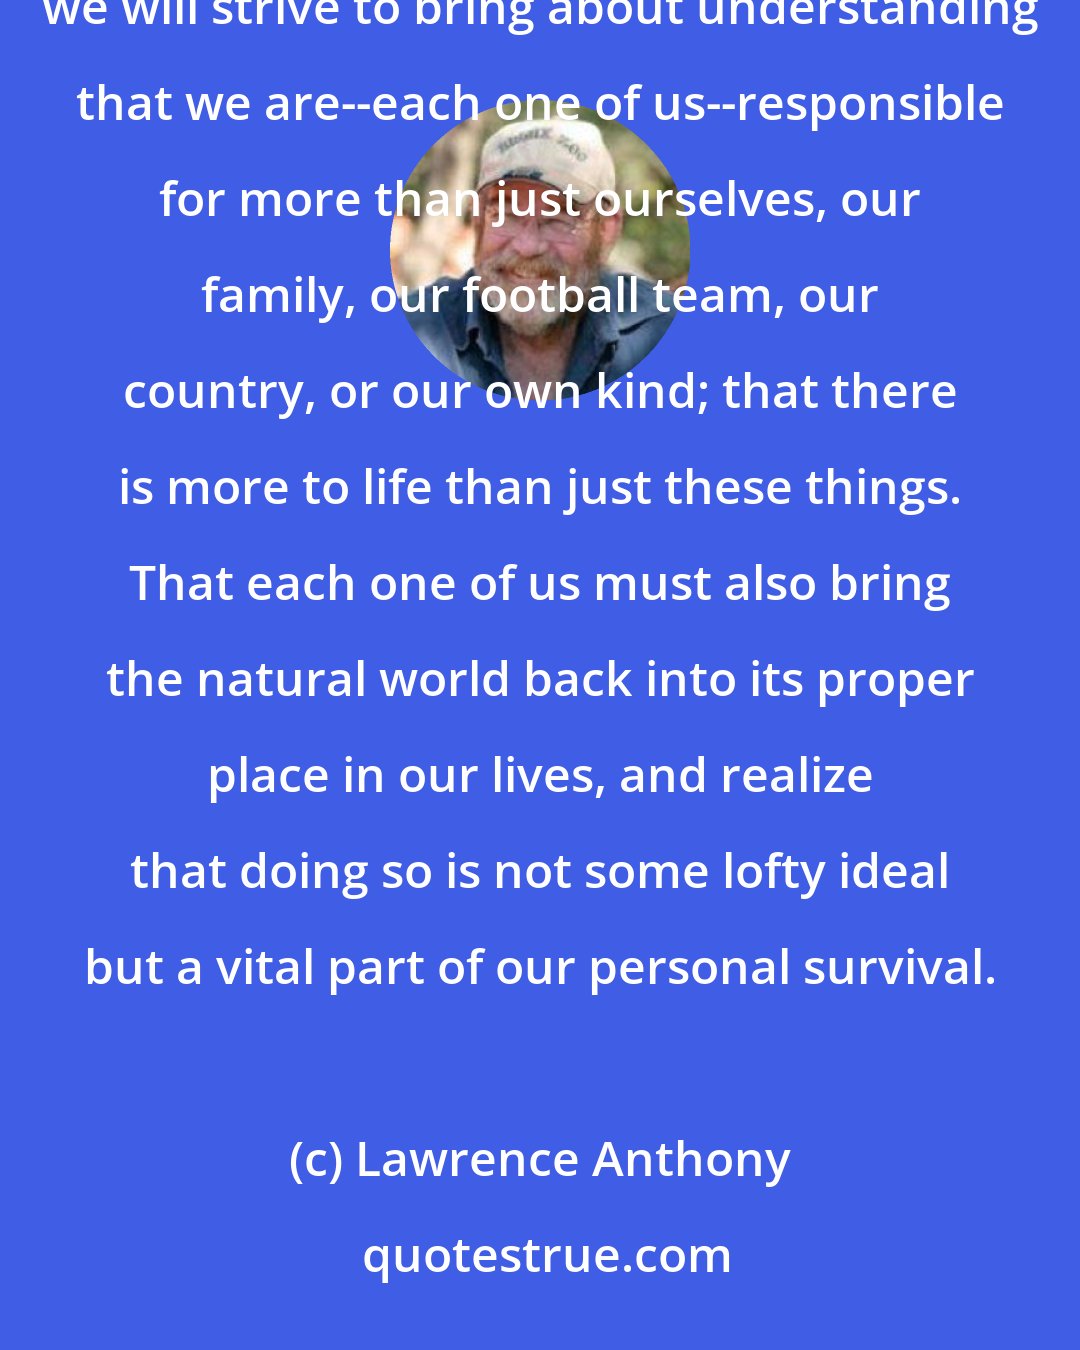 Lawrence Anthony: Why do we so mindlessly abuse our planet, our only home? The answer to that lies in each of us. Therefore, we will strive to bring about understanding that we are--each one of us--responsible for more than just ourselves, our family, our football team, our country, or our own kind; that there is more to life than just these things. That each one of us must also bring the natural world back into its proper place in our lives, and realize that doing so is not some lofty ideal but a vital part of our personal survival.